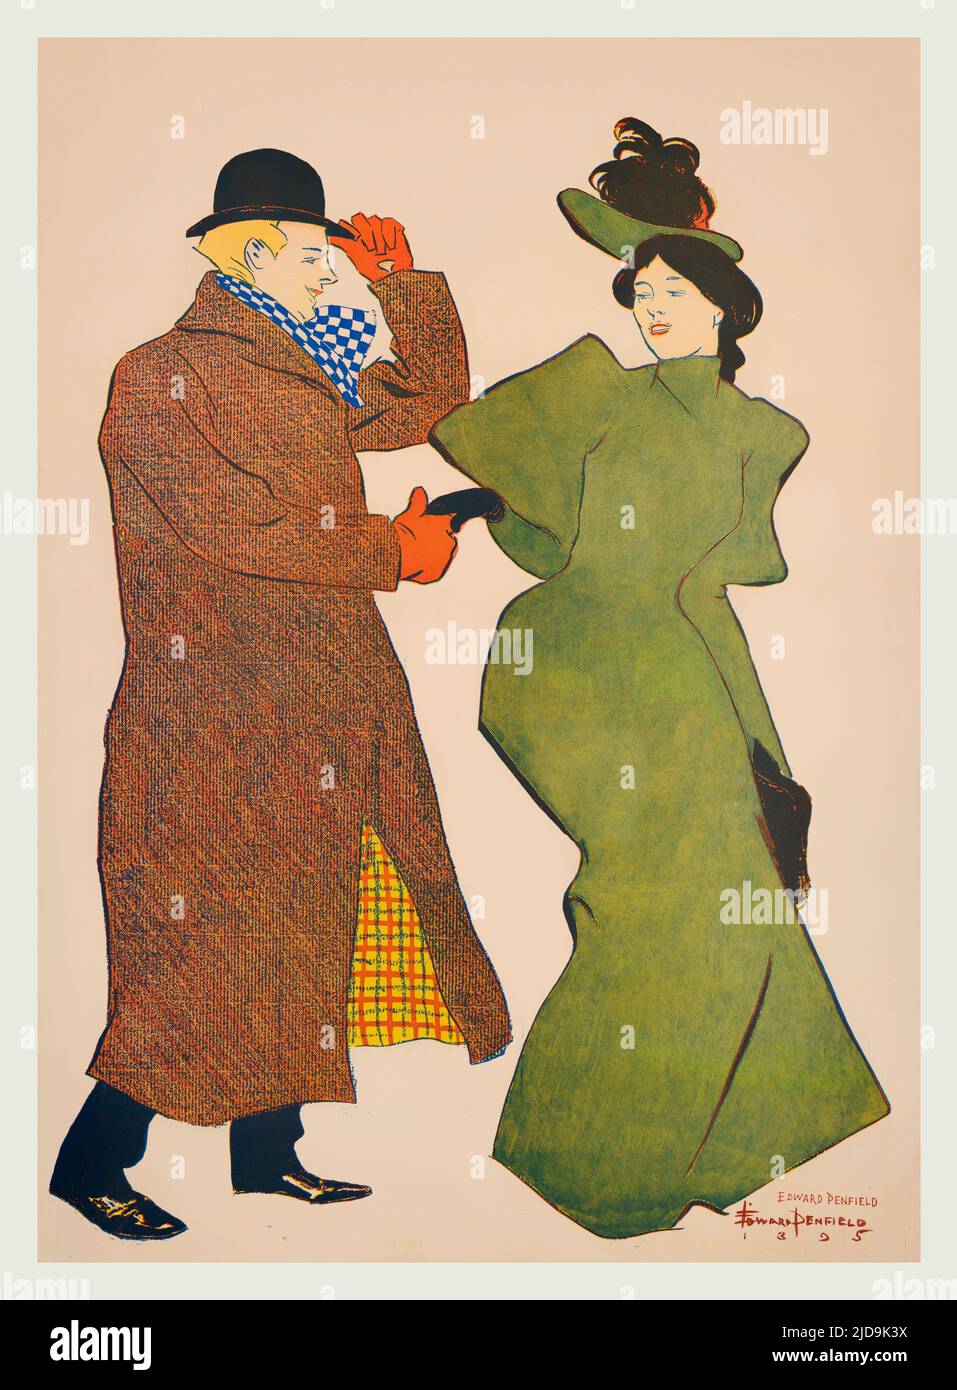 A detail from a turn of the 20th century illustration by Edward Penfield (1866-1925) considered by many to be the father of the American poster. Featuring a couple, the man introducing himself to the young woman. Originally a cover to Harper’s Magazine, the oldest general-interest monthly in America. Stock Photo